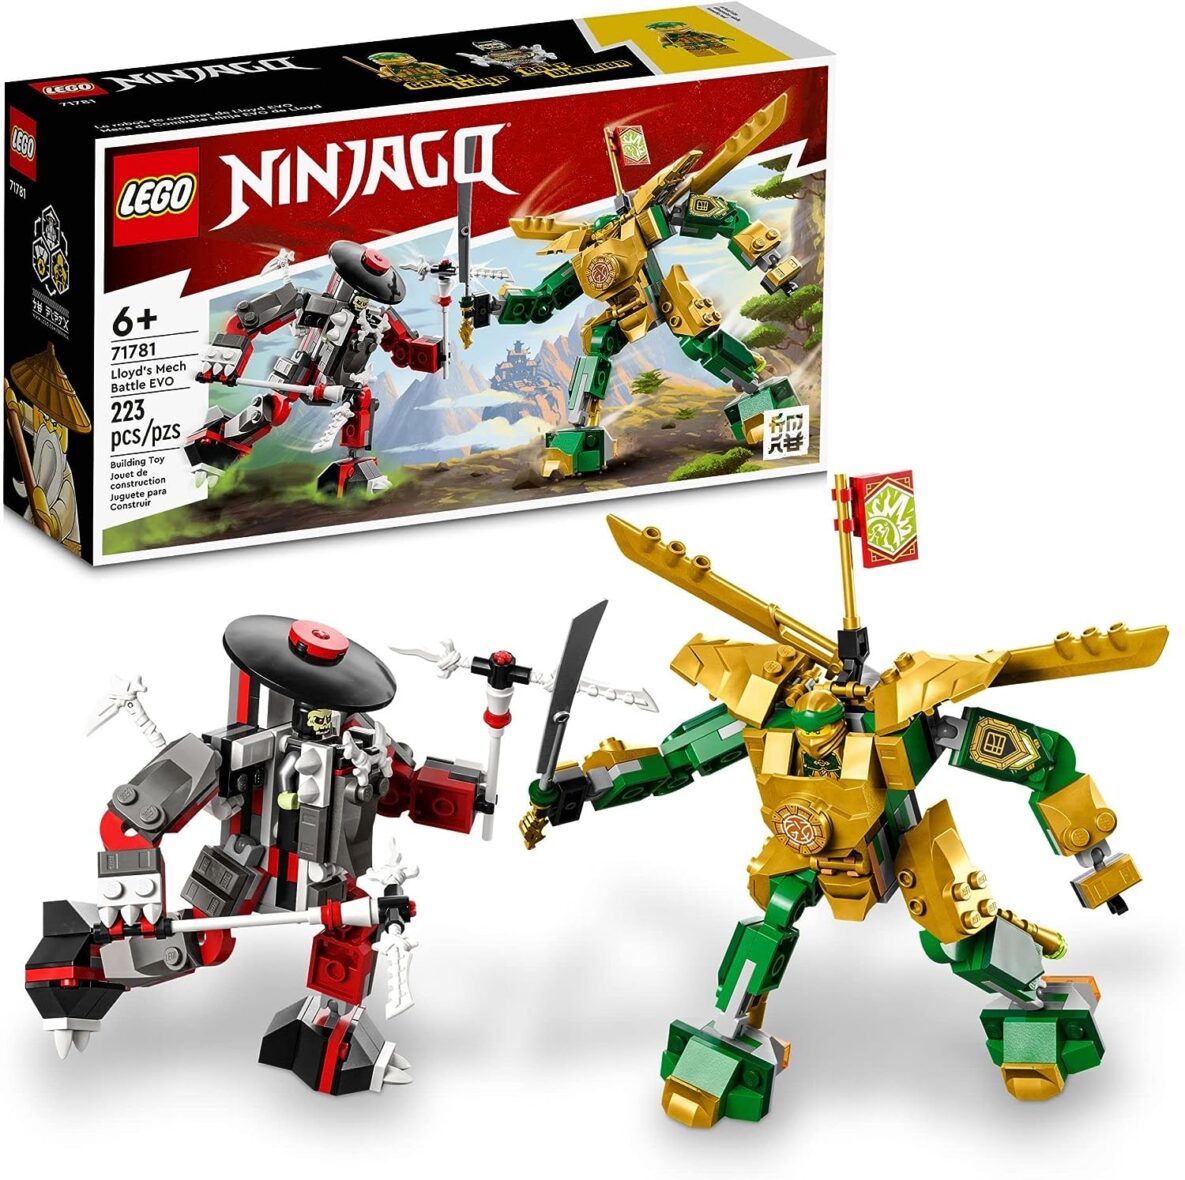 Lego NINJAGO Lloyd’s Mech Battle EVO Building Set 71781, with 2 Action Figures, 2 Posable Ninja Action Figures to Build, Ninja Toy for Kids Ages 6+ with Bone Warrior and Golden Lloyd Minifigures